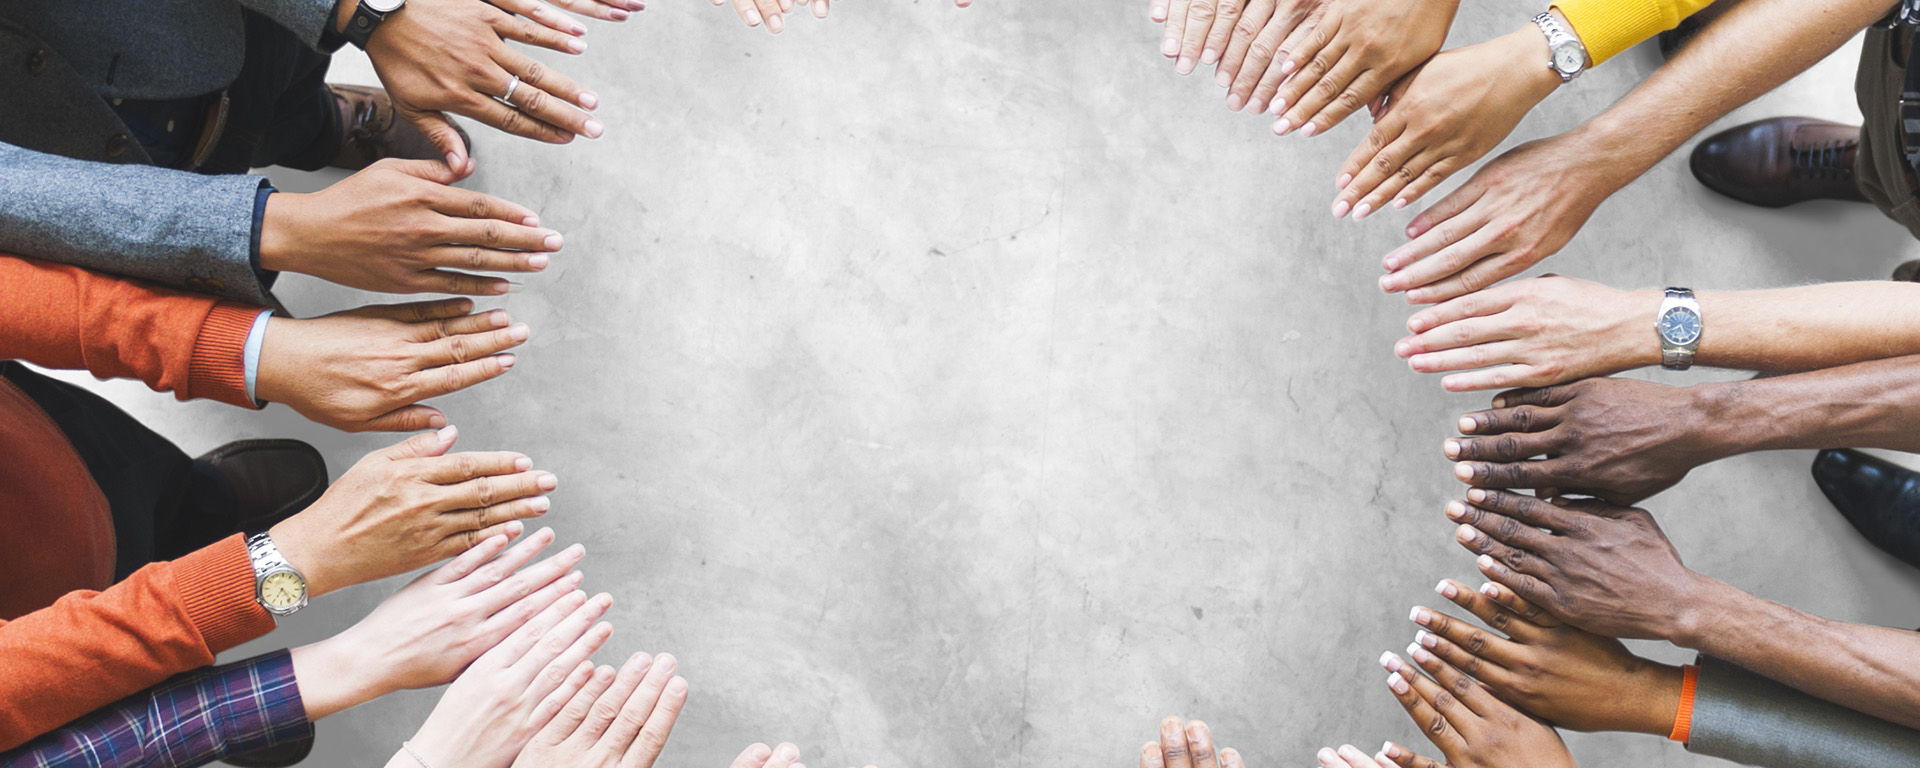 group of hands in circle